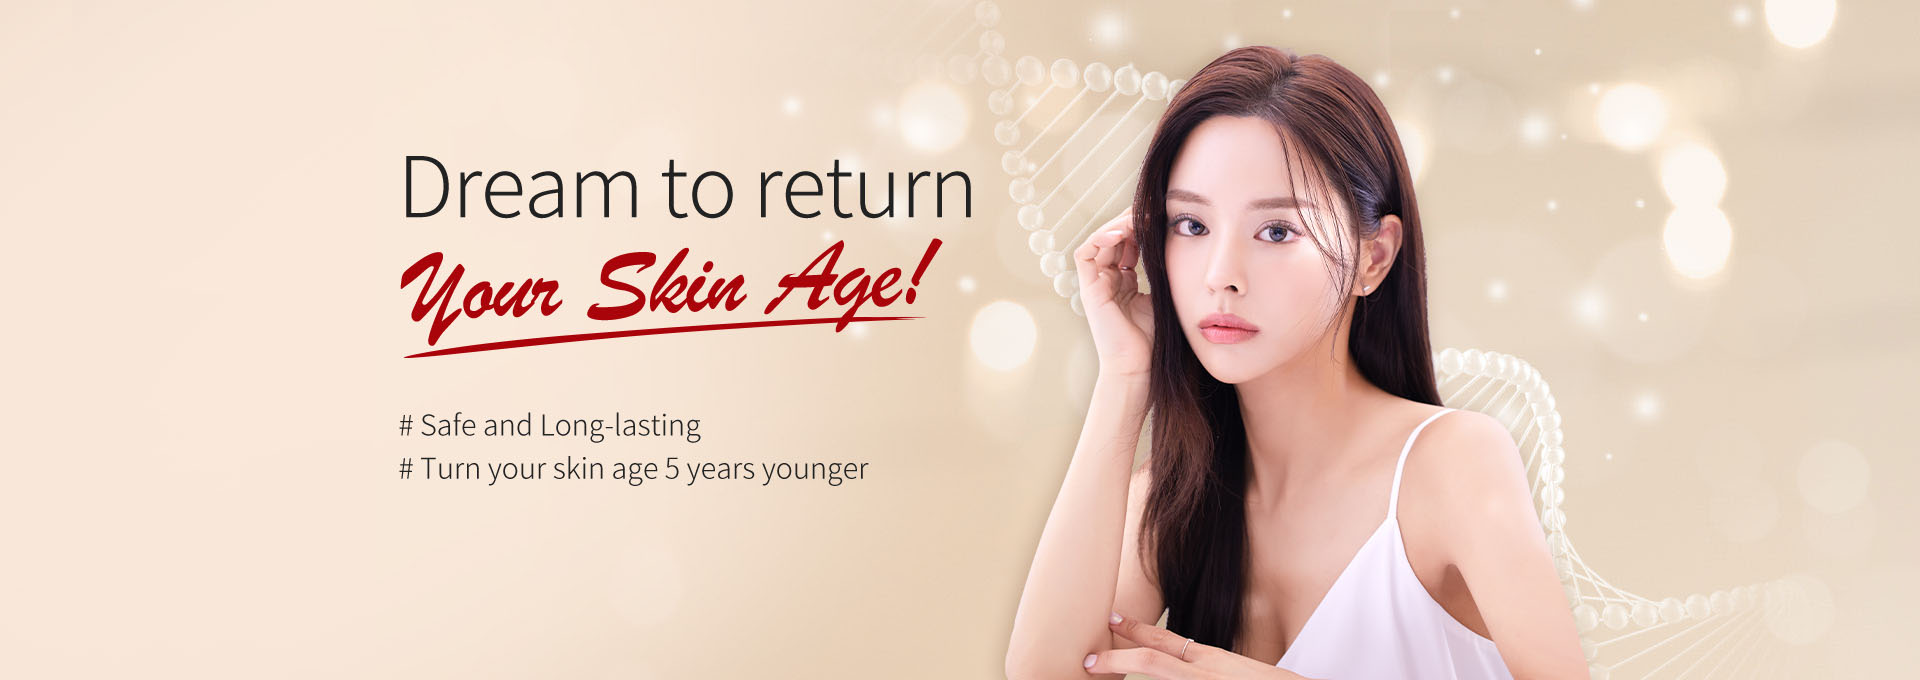 Dream to return your skin age!